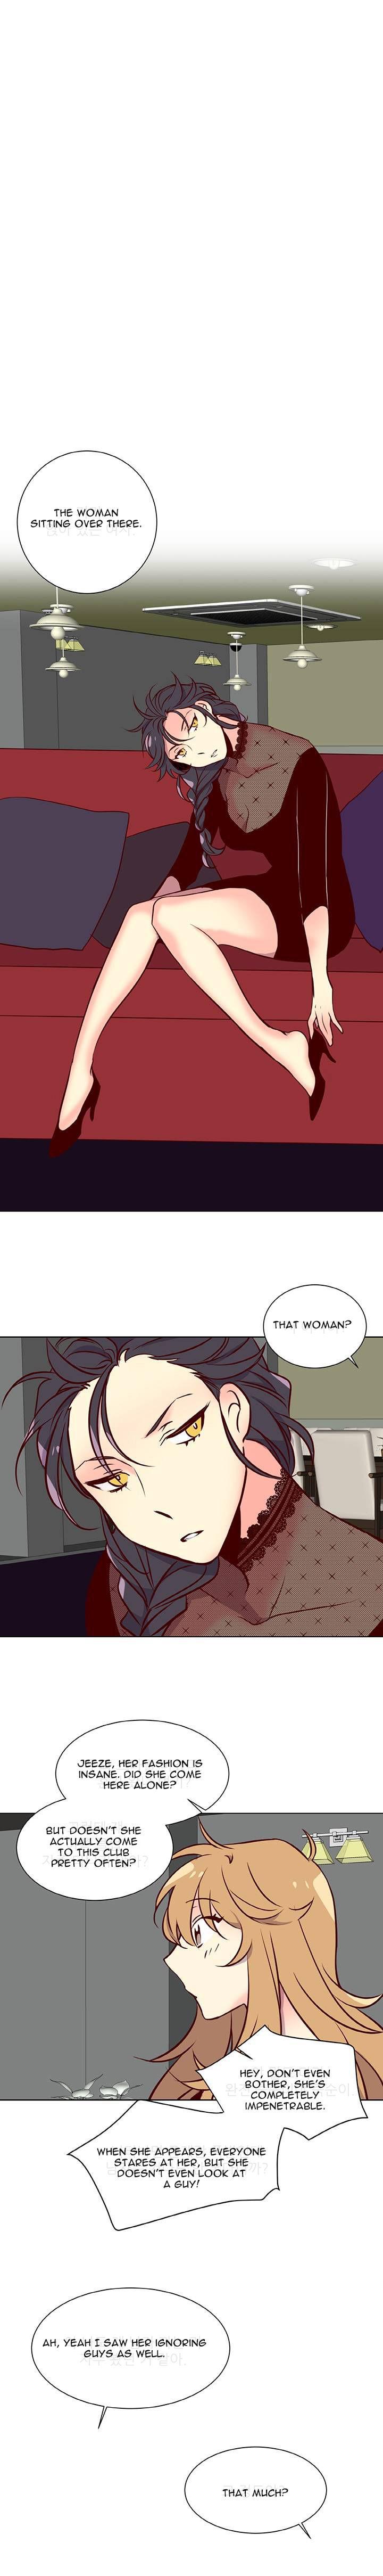 Spy Two Lives in the Same House Ch. 1-24 - Original Yoga - Page 3